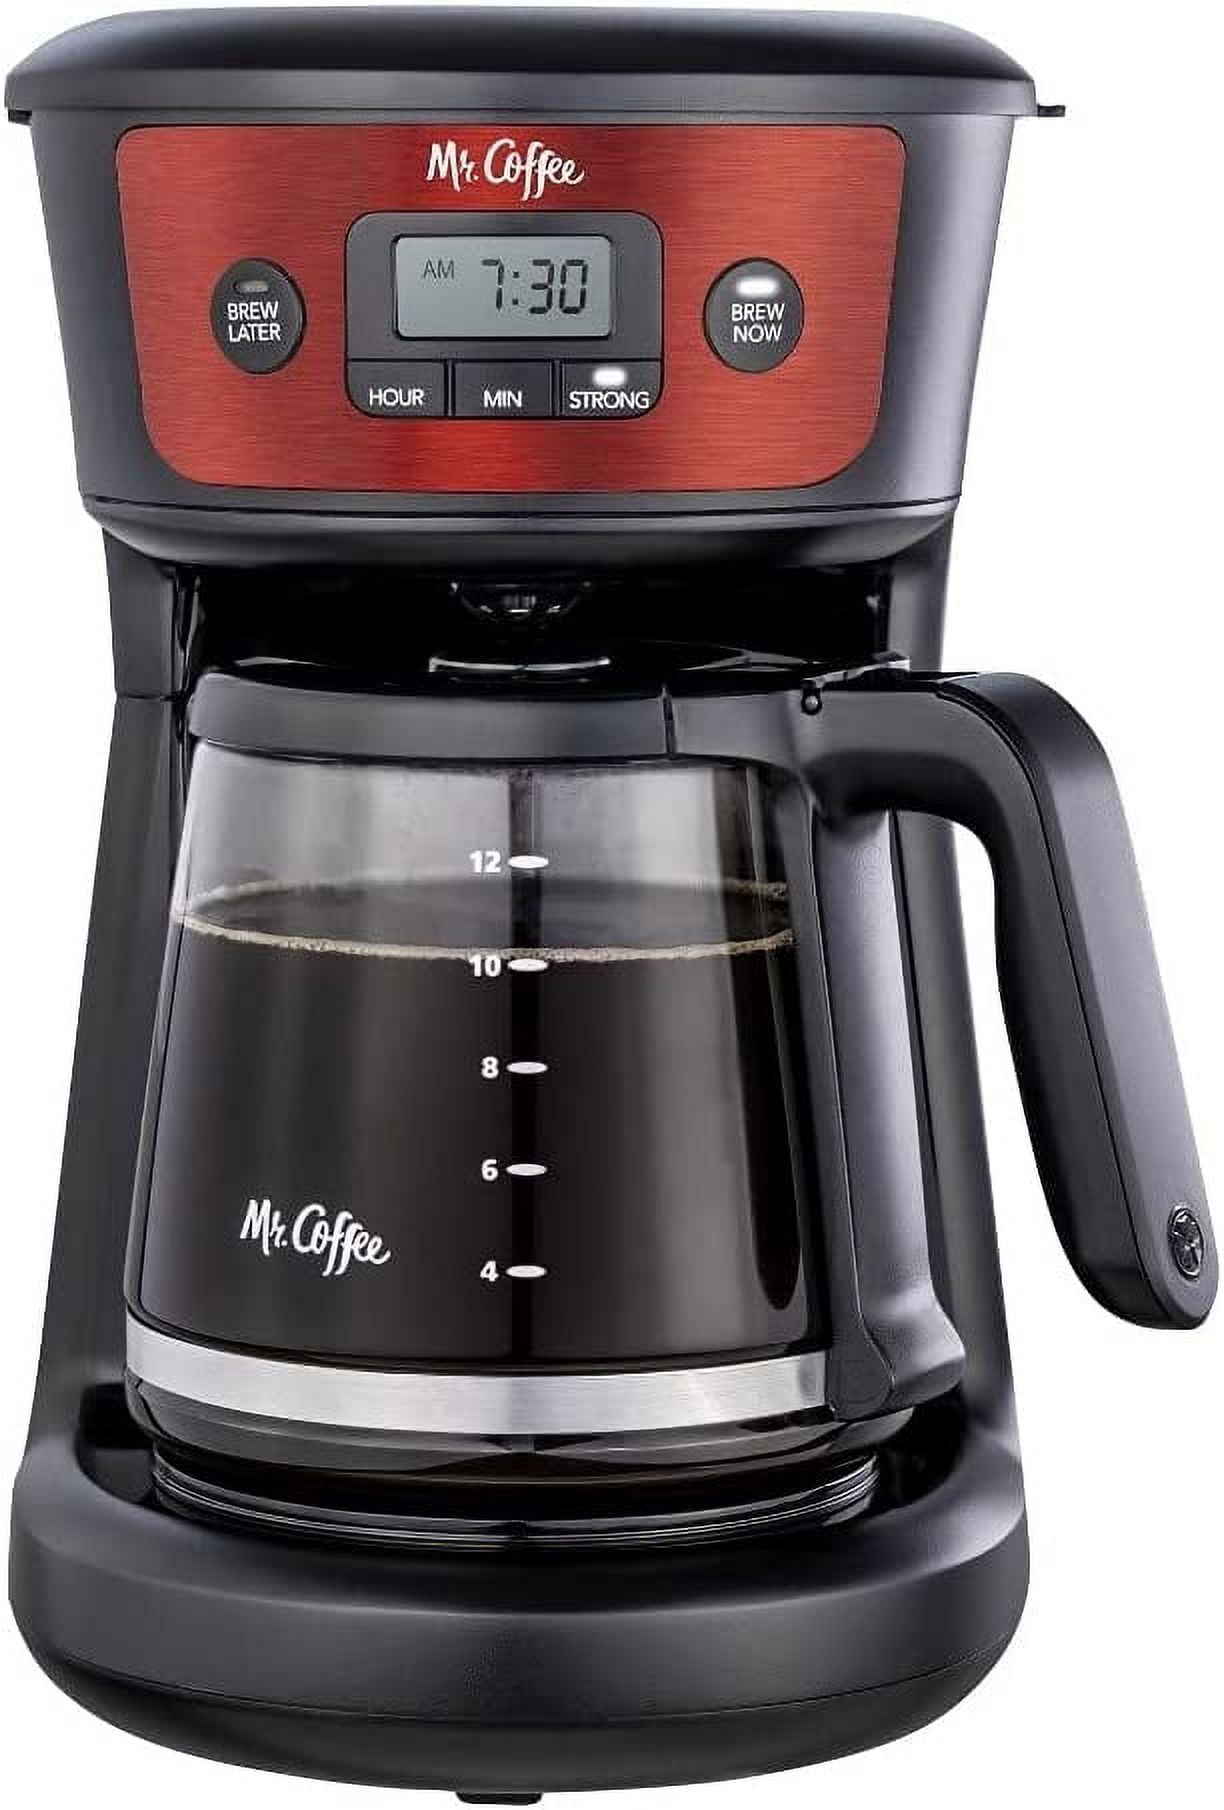  Mr. Coffee 12-Cup Programmable Coffeemaker, Strong Brew  Selector, Stainless Steel.: Home & Kitchen